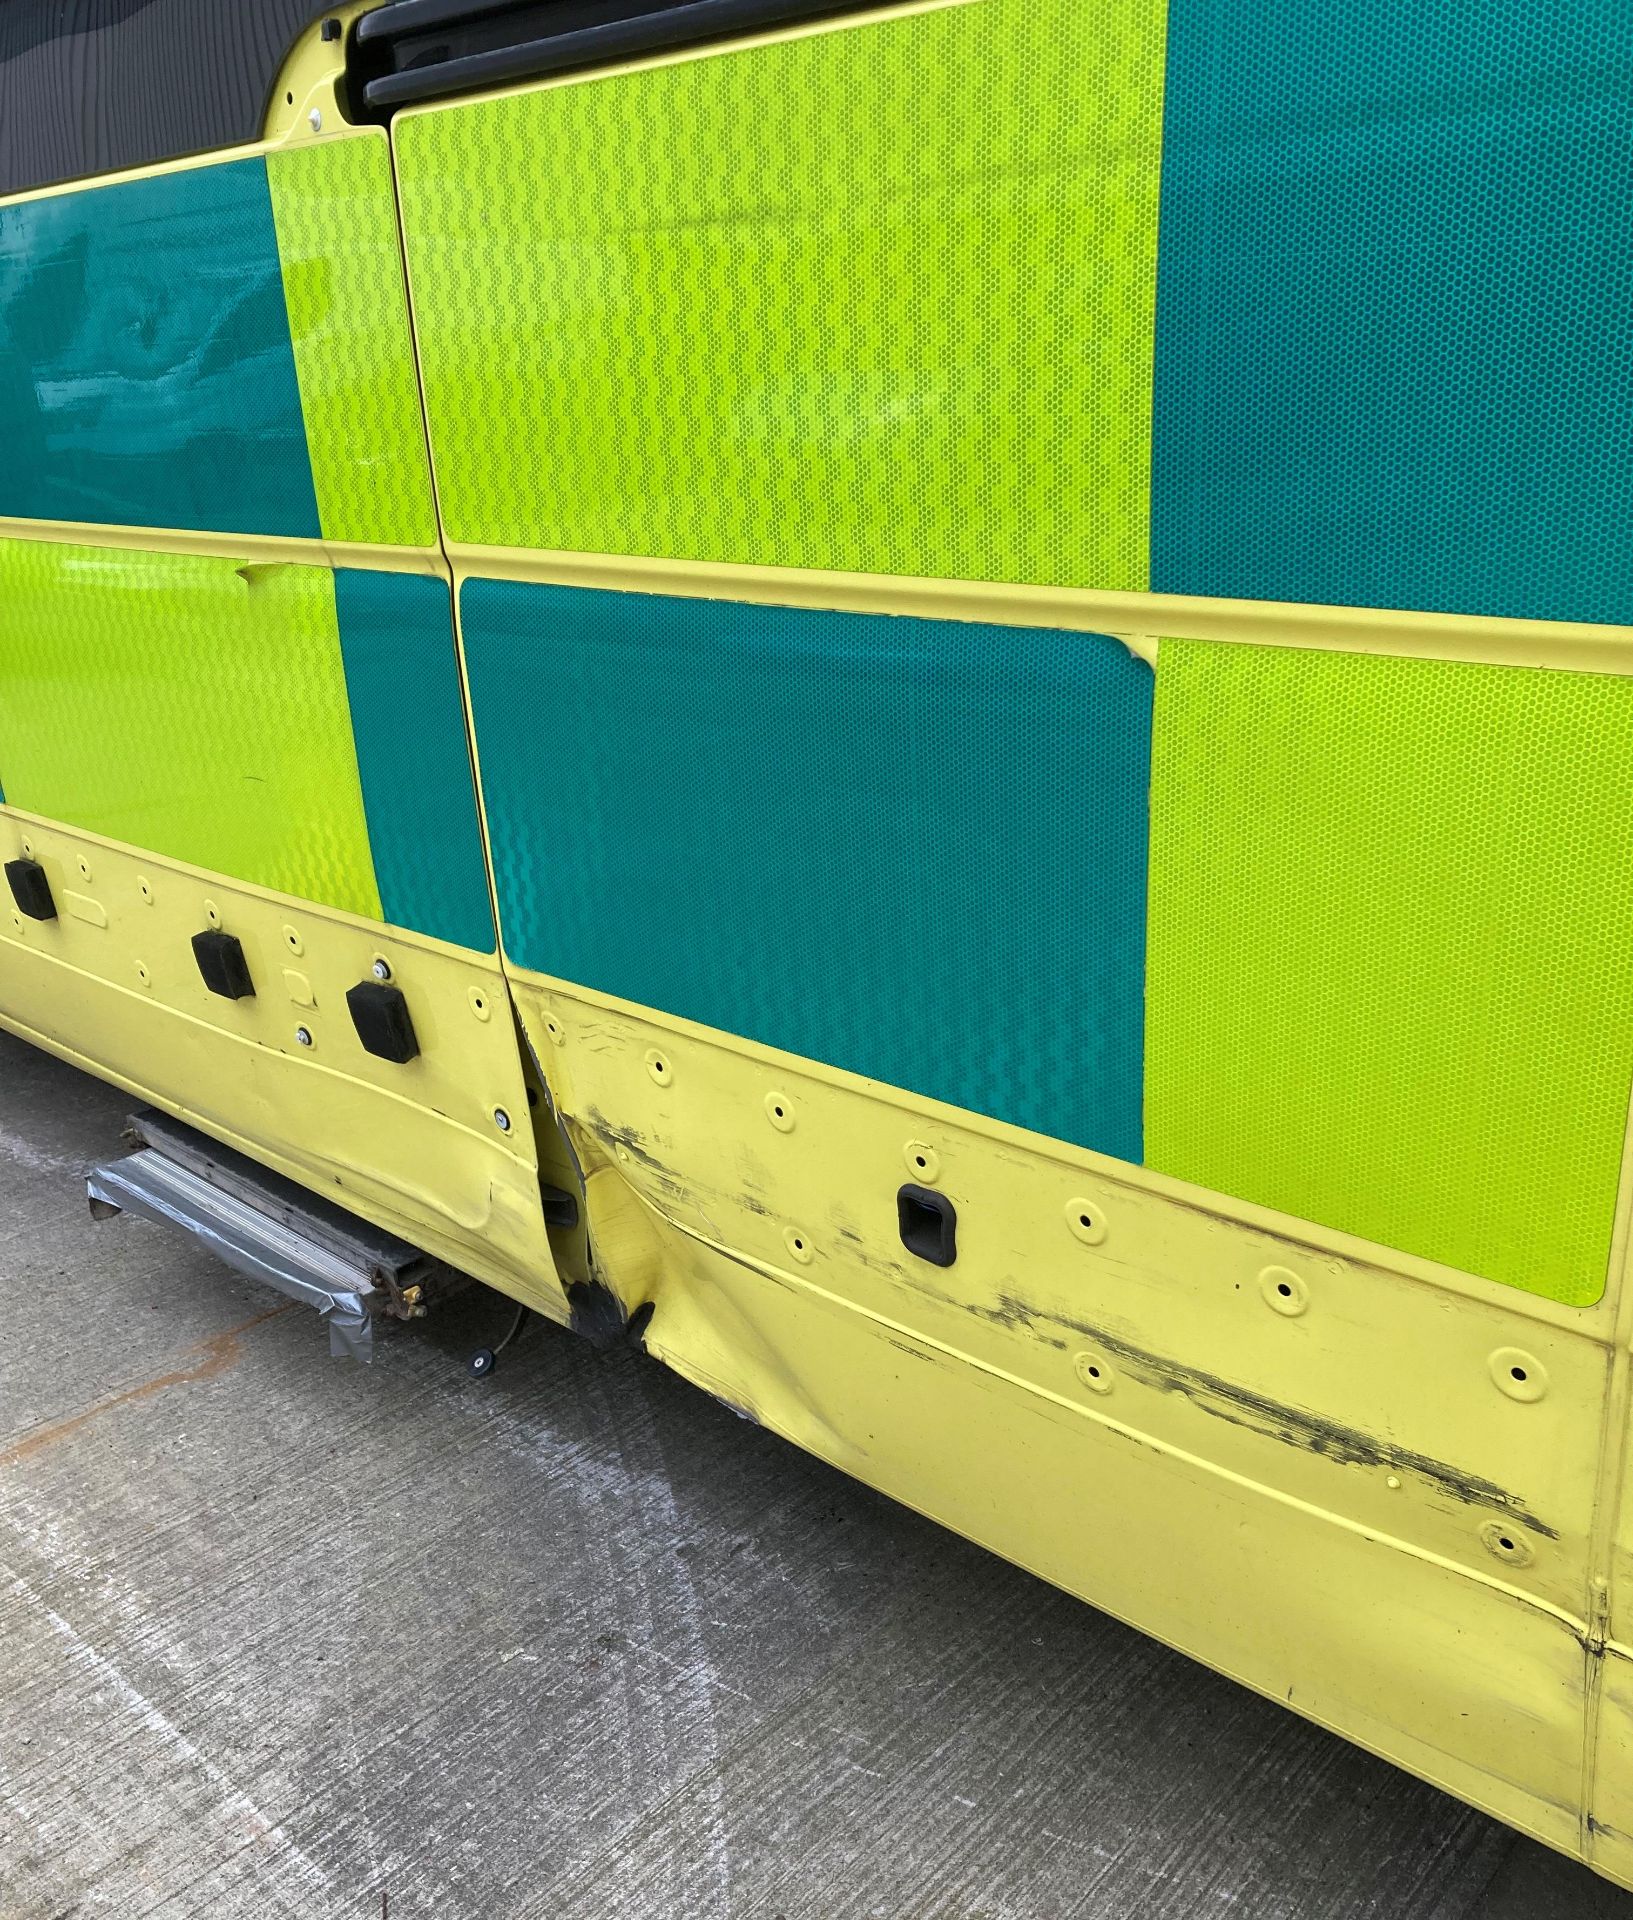 RENAULT MASTER 2.3 LM35 DCi AMBULANCE - Diesel - Yellow - complete with any contents. - Image 4 of 13